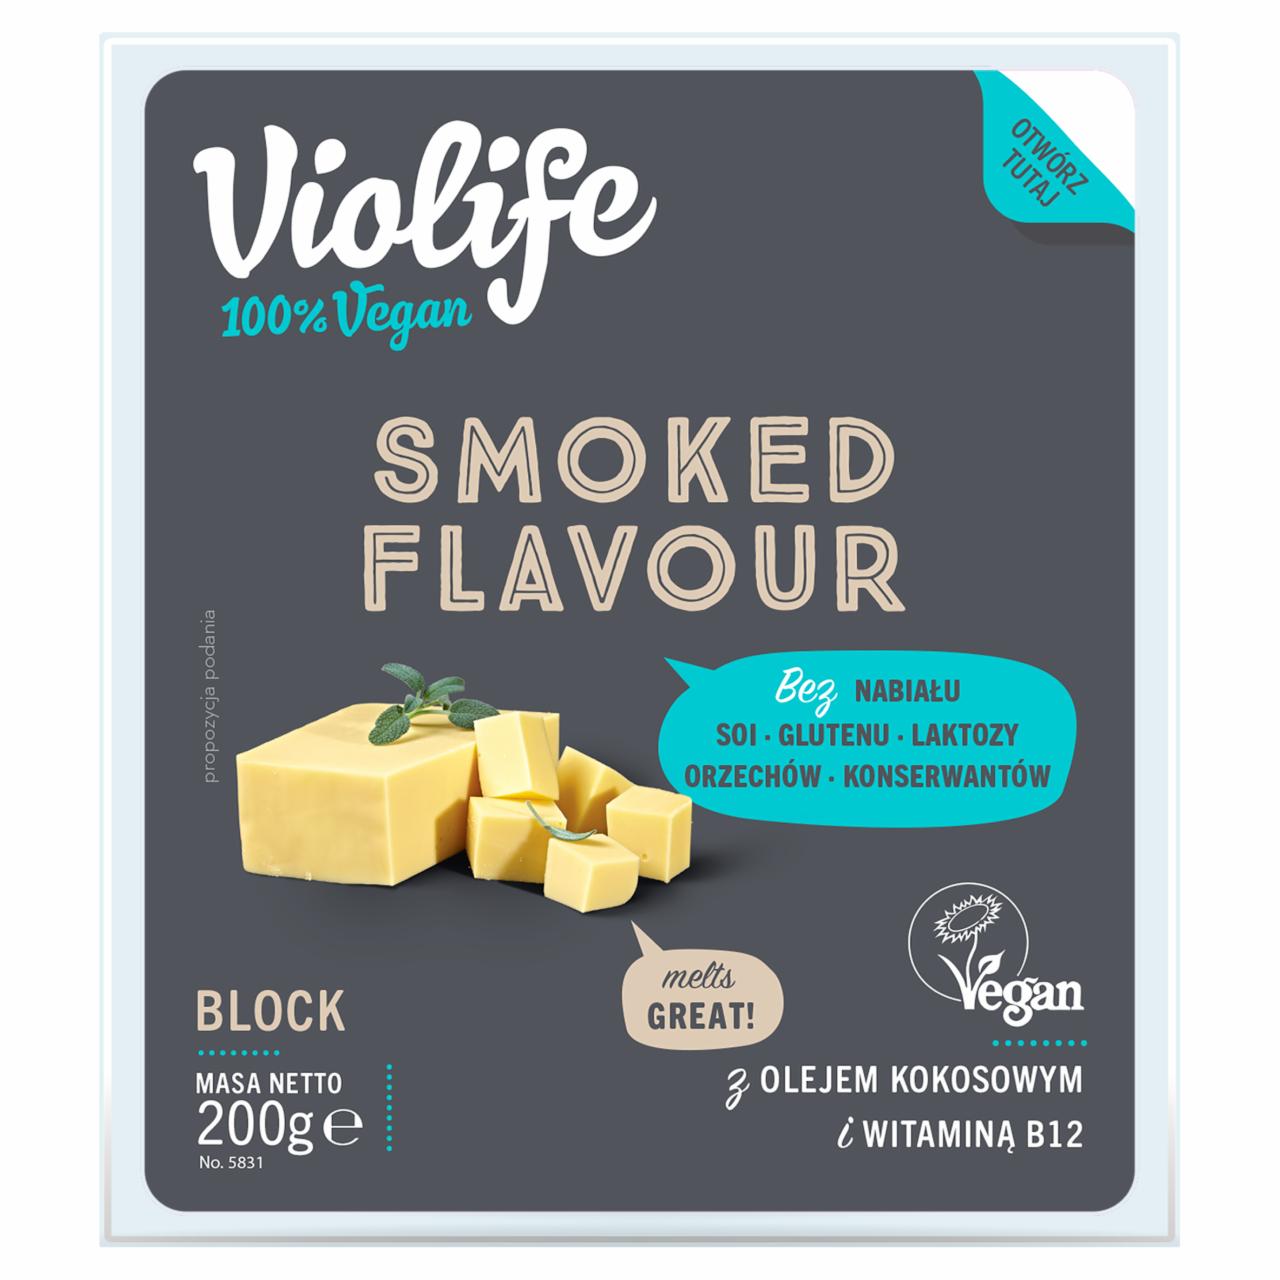 Photo - Violife Smoked Flavour Block Product Based on Coconut Oil 200 g